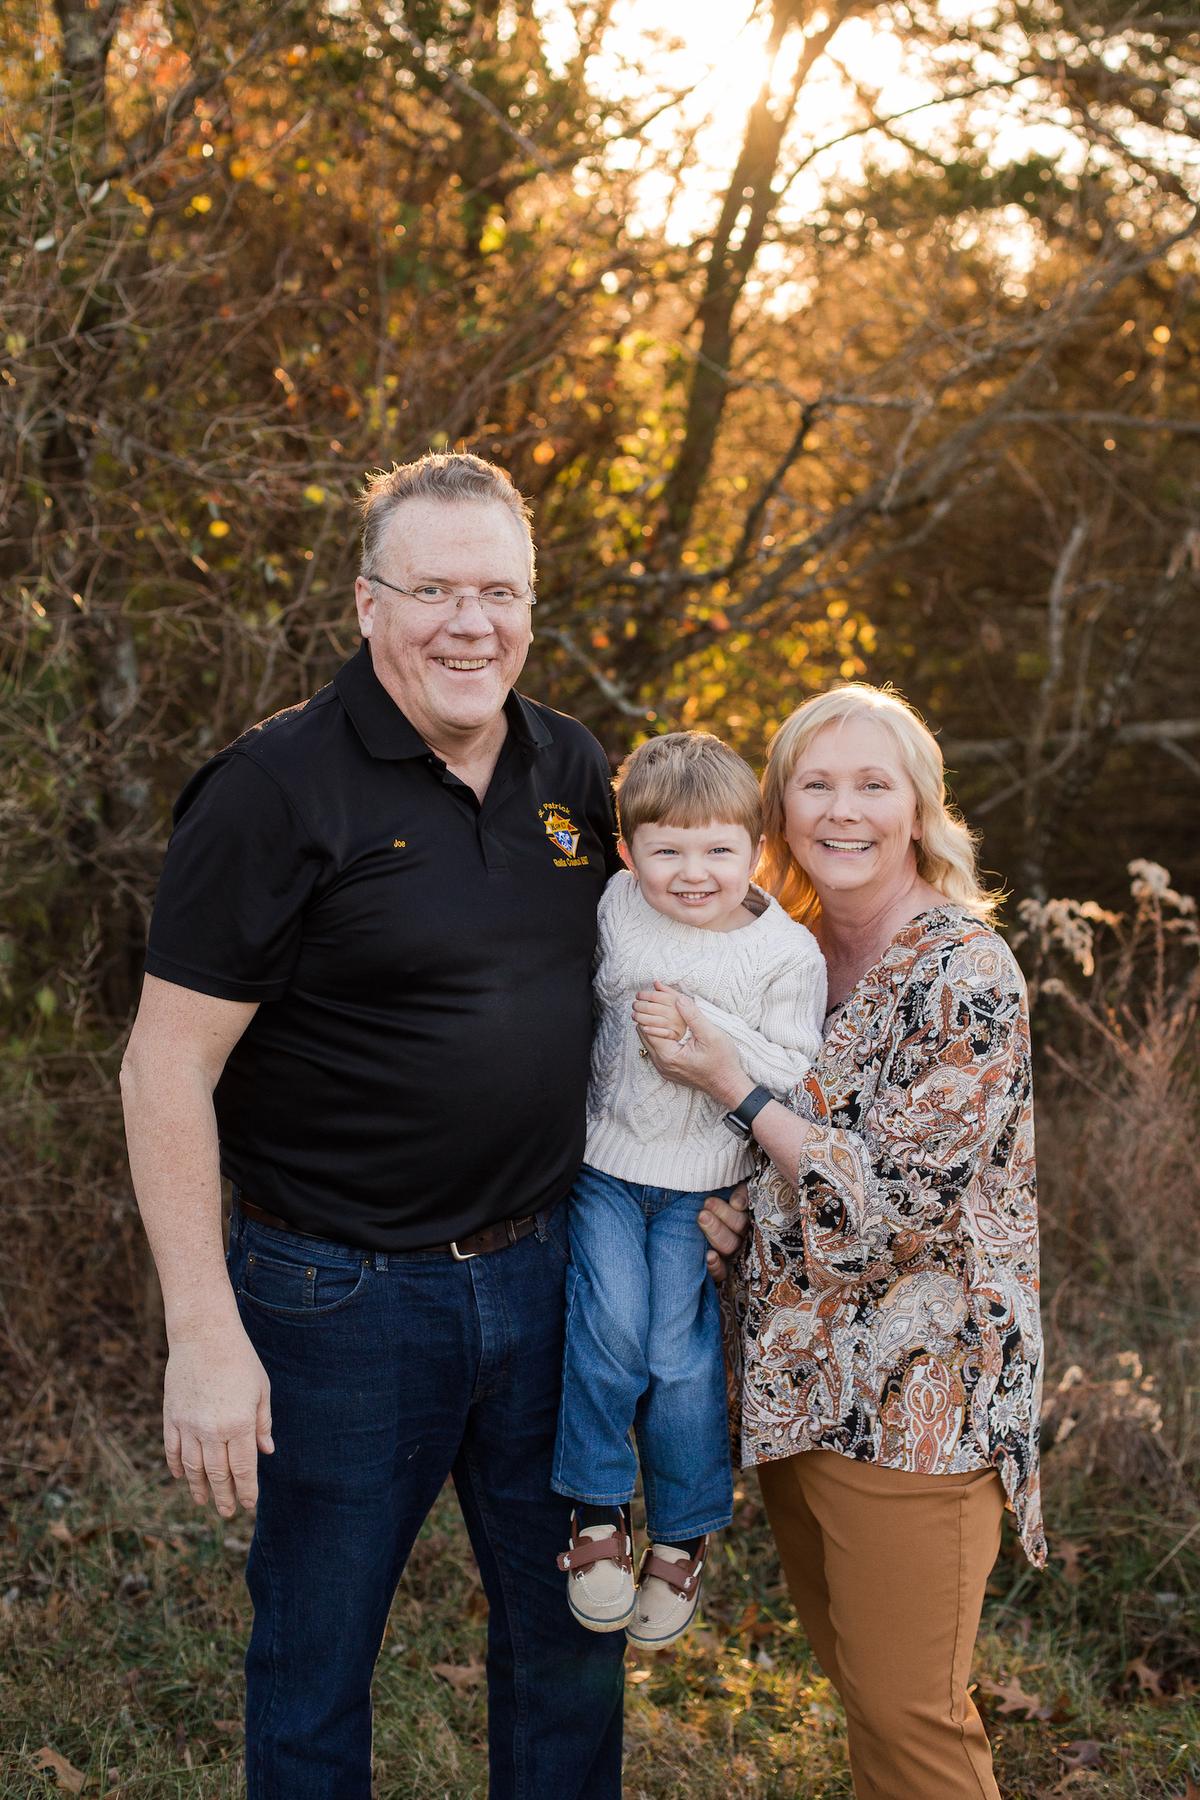 Noah with his grandparents, Joe and Jane, the co-founders of the Pregnancy Resource Center of Rolla. (Courtesy of <a href="https://www.facebook.com/faithann95">Faith-Ann Dalton</a> and <a href="https://supportmyprc.com/">PRC of Rolla</a>)